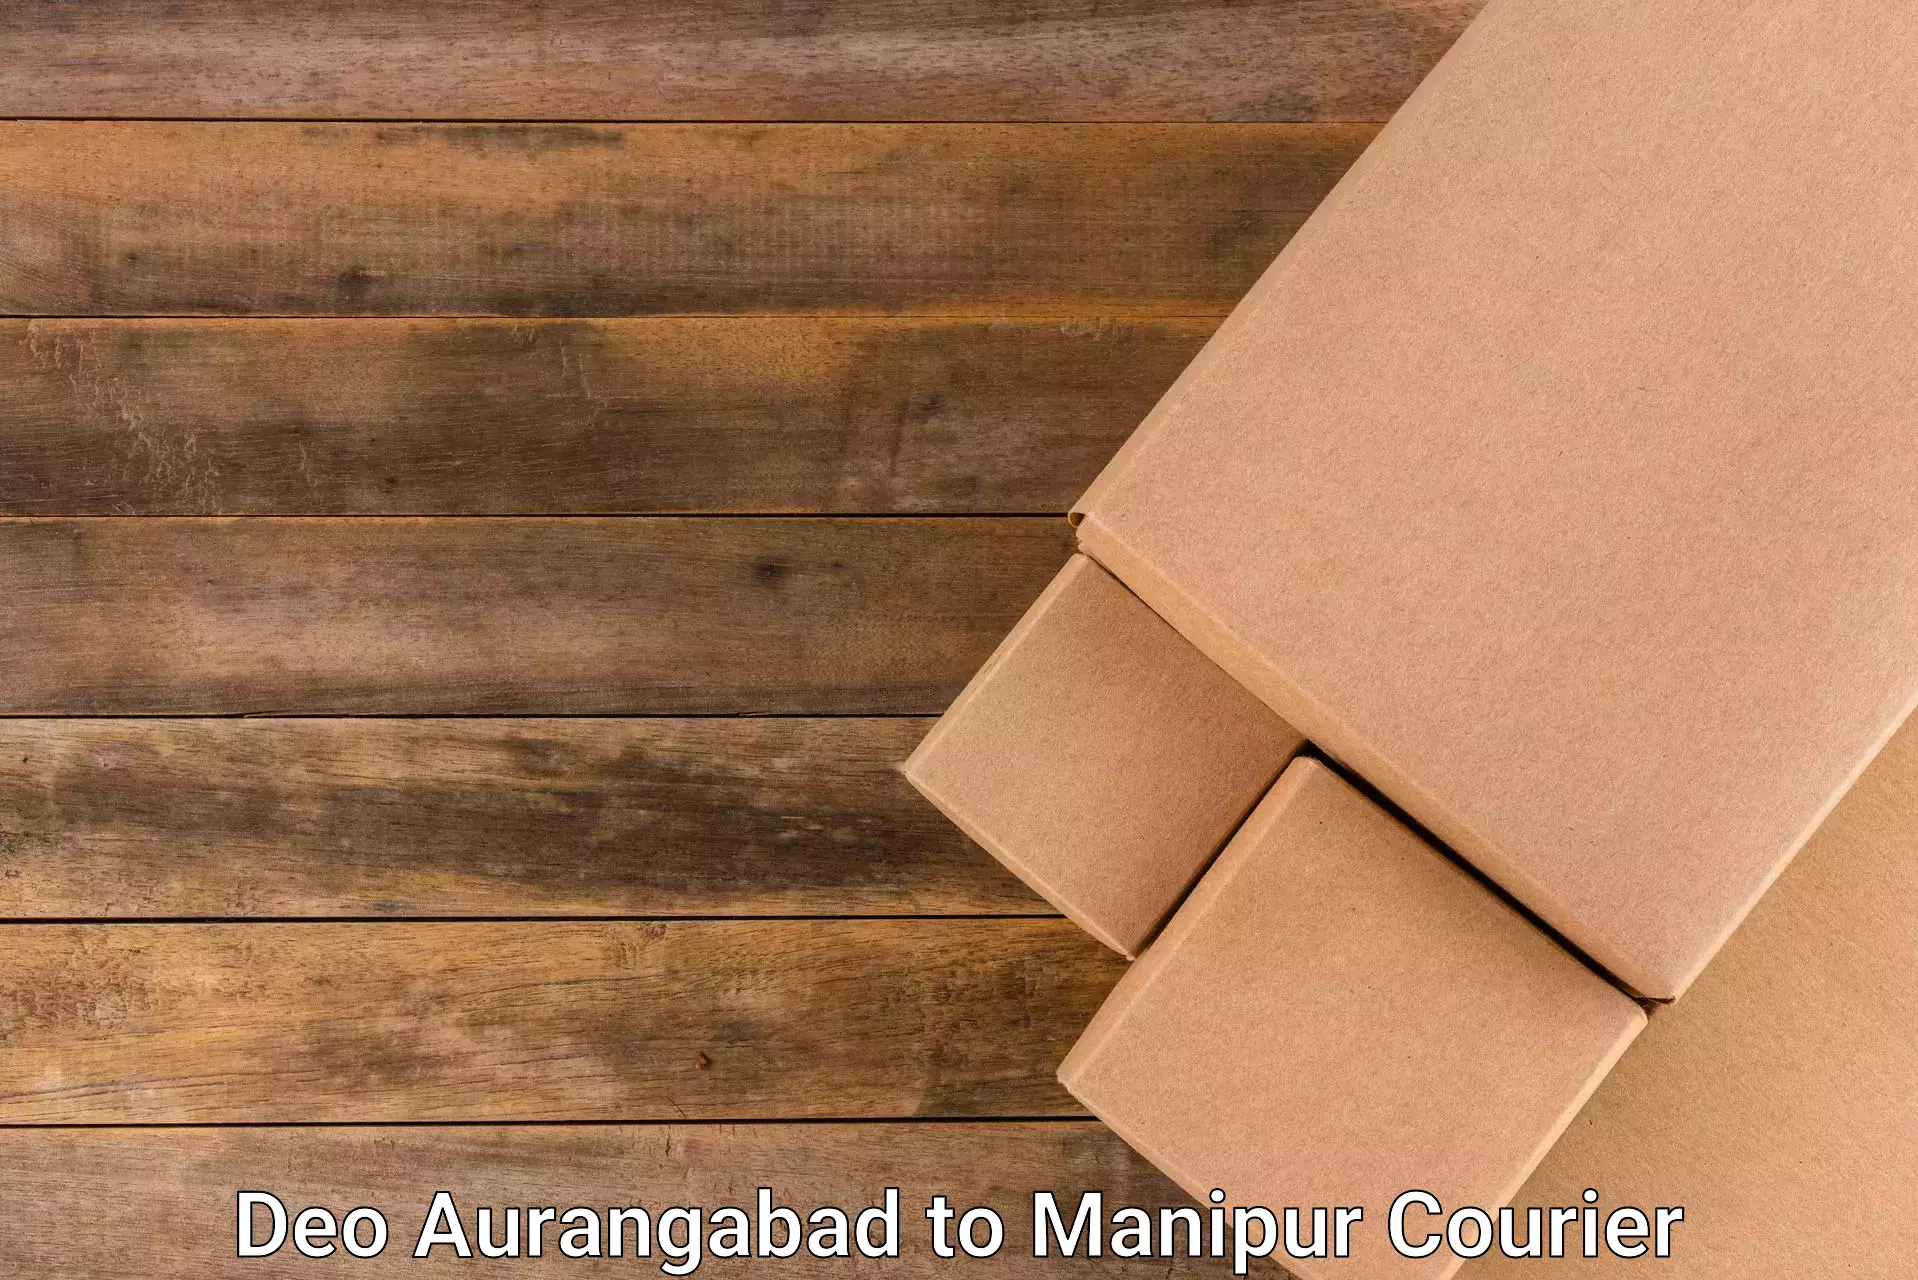 Large package courier Deo Aurangabad to Imphal